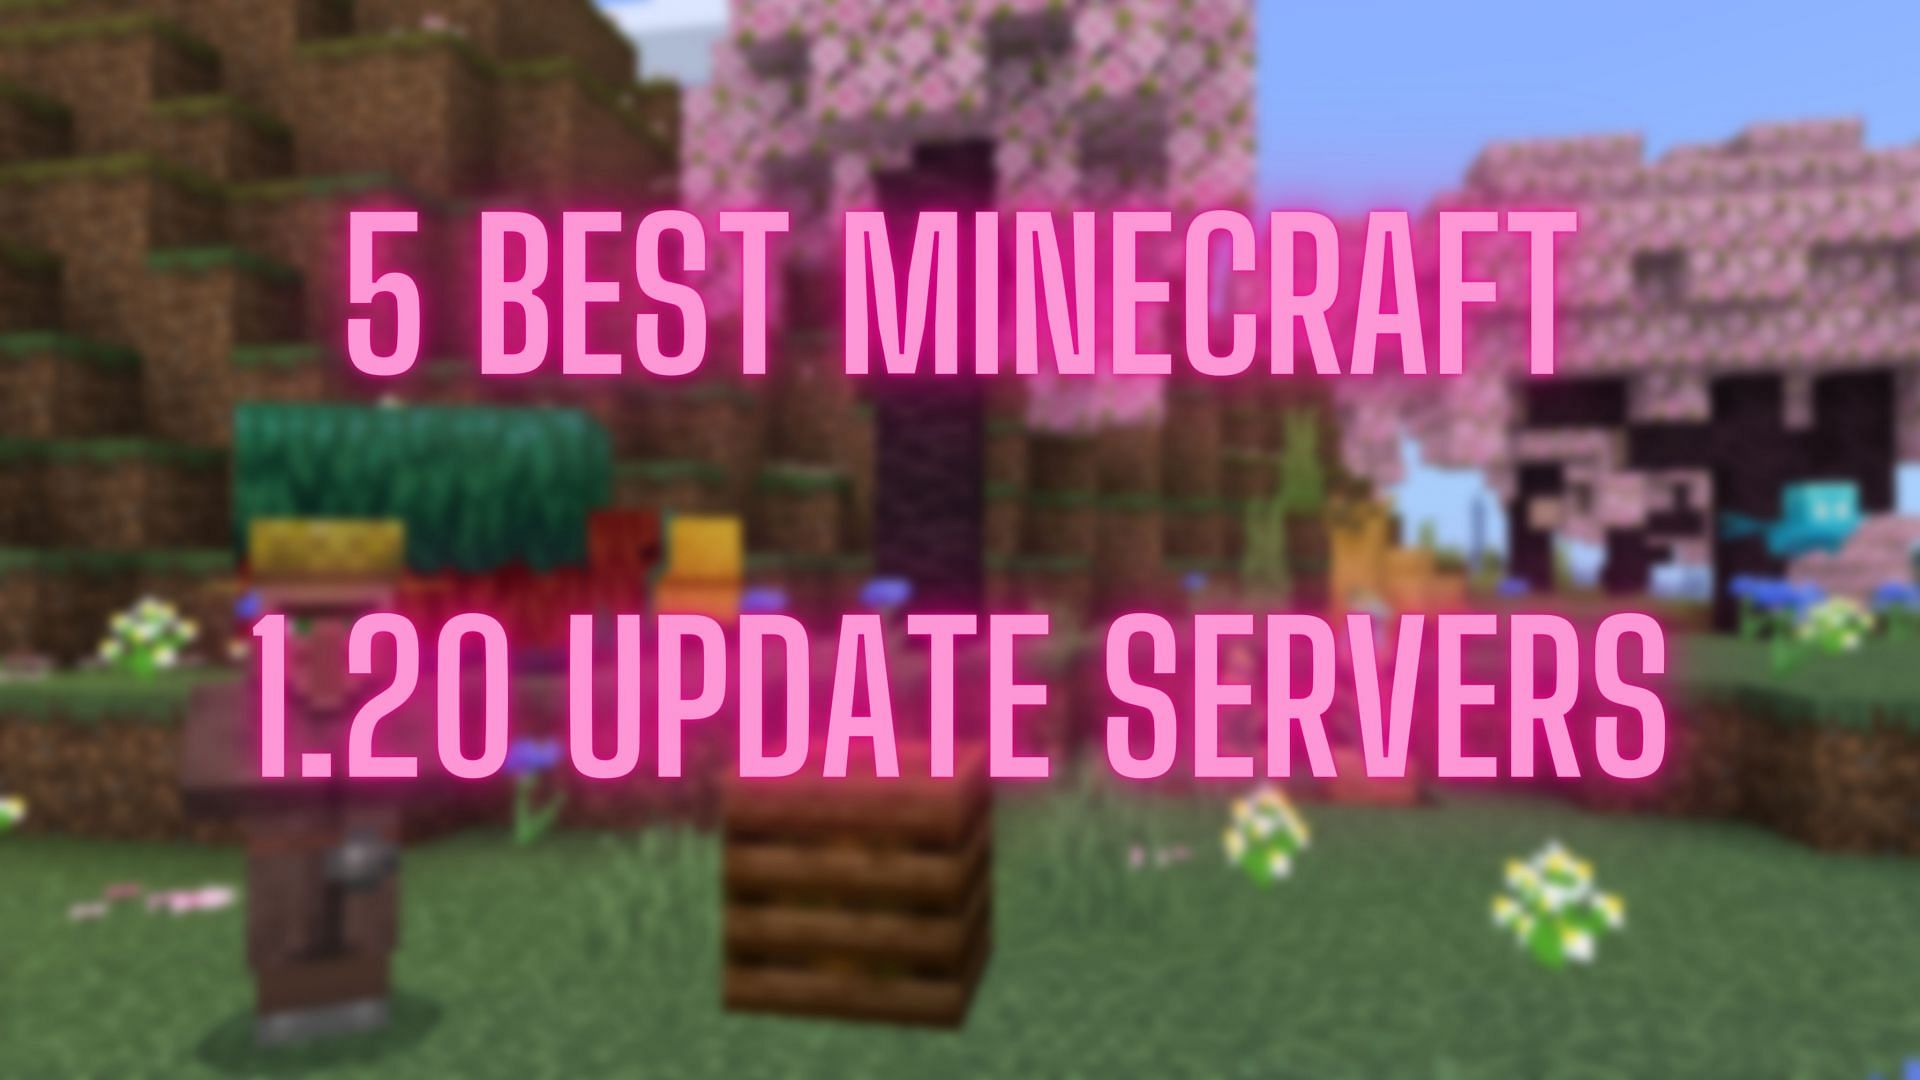 Minecraft 1.20 servers allow players to experience the new update with others (Image via Mojang)